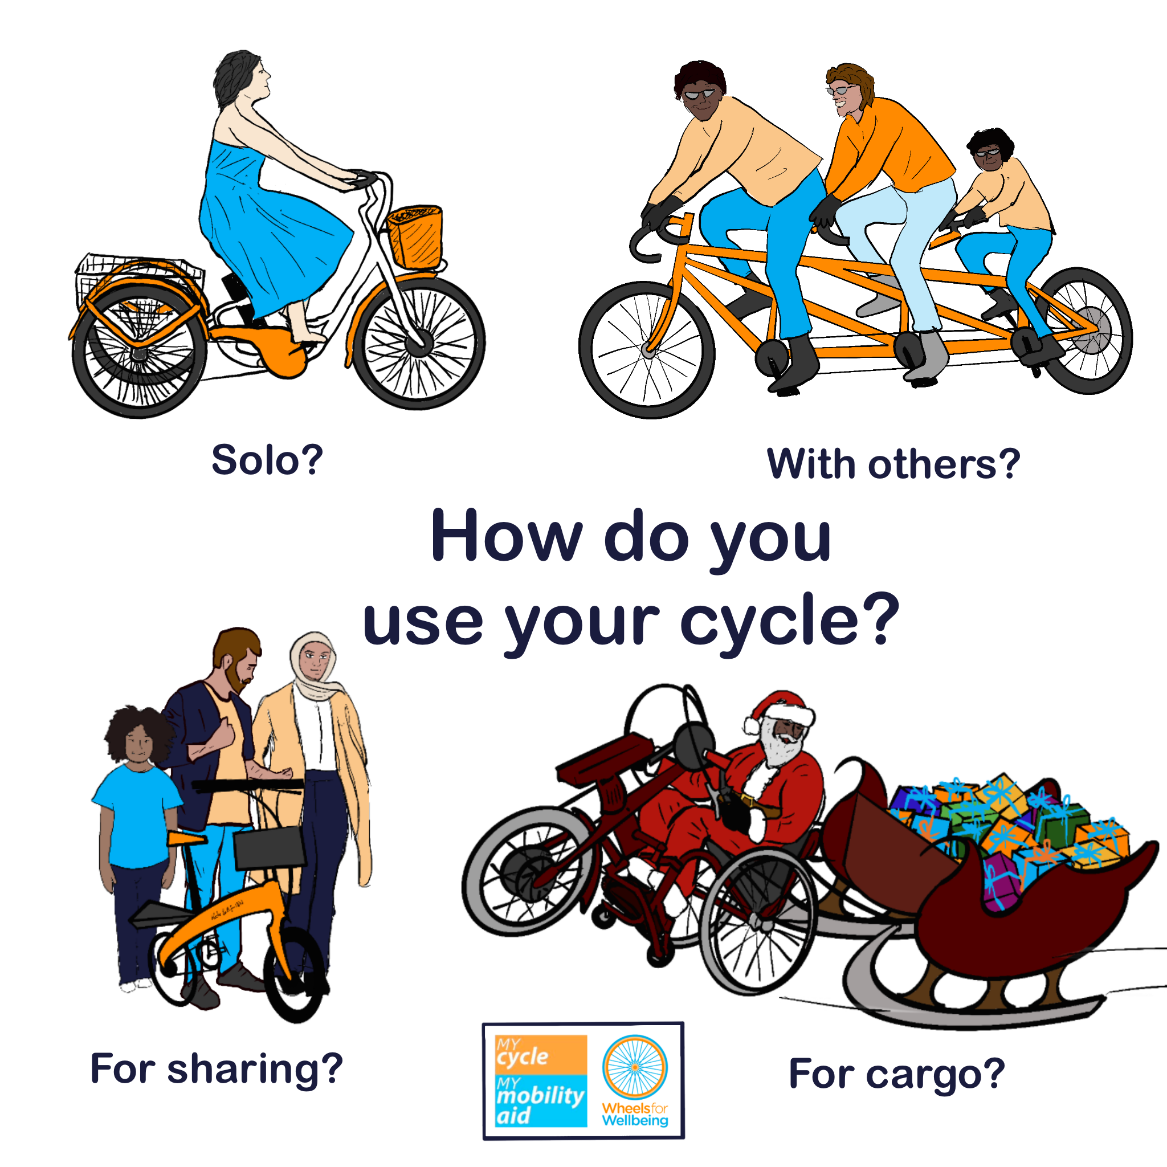 Graphic has text "how do you use your cycle?" with drawings of: Woman on trike with word "solo?" Three people on a triplet cycle with words "with others?" Three standing people with a folding e-bike with words "for sharing?" Santa riding a handcycle pulling a sleigh full of presents with words "for cargo?"